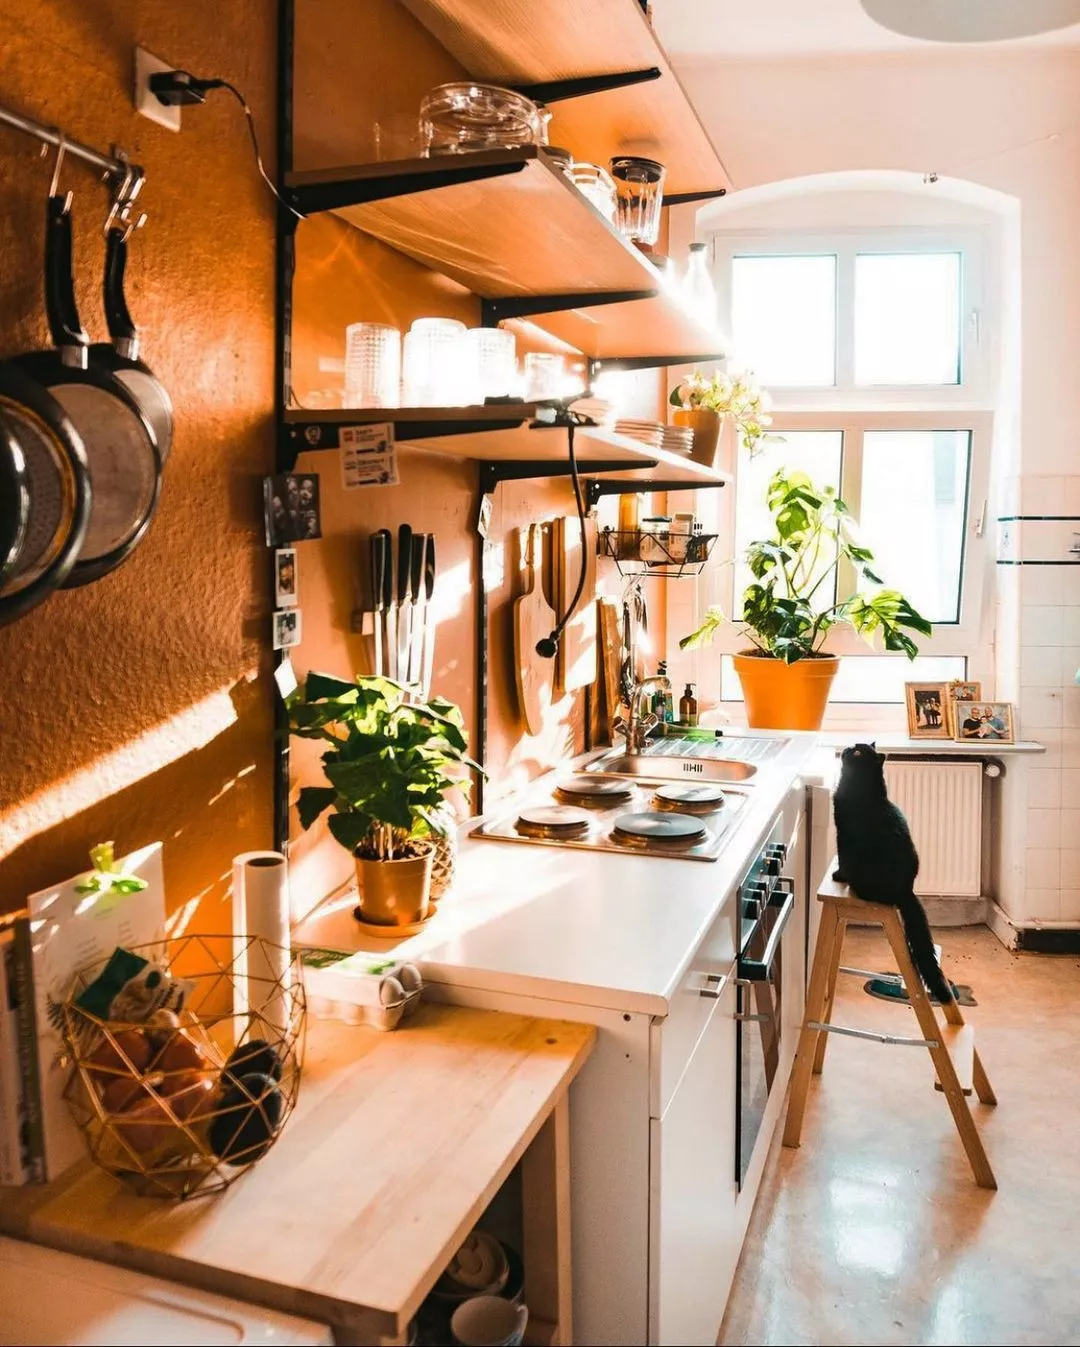 5 Storage Ideas for Small Homes, Apartments and Spaces